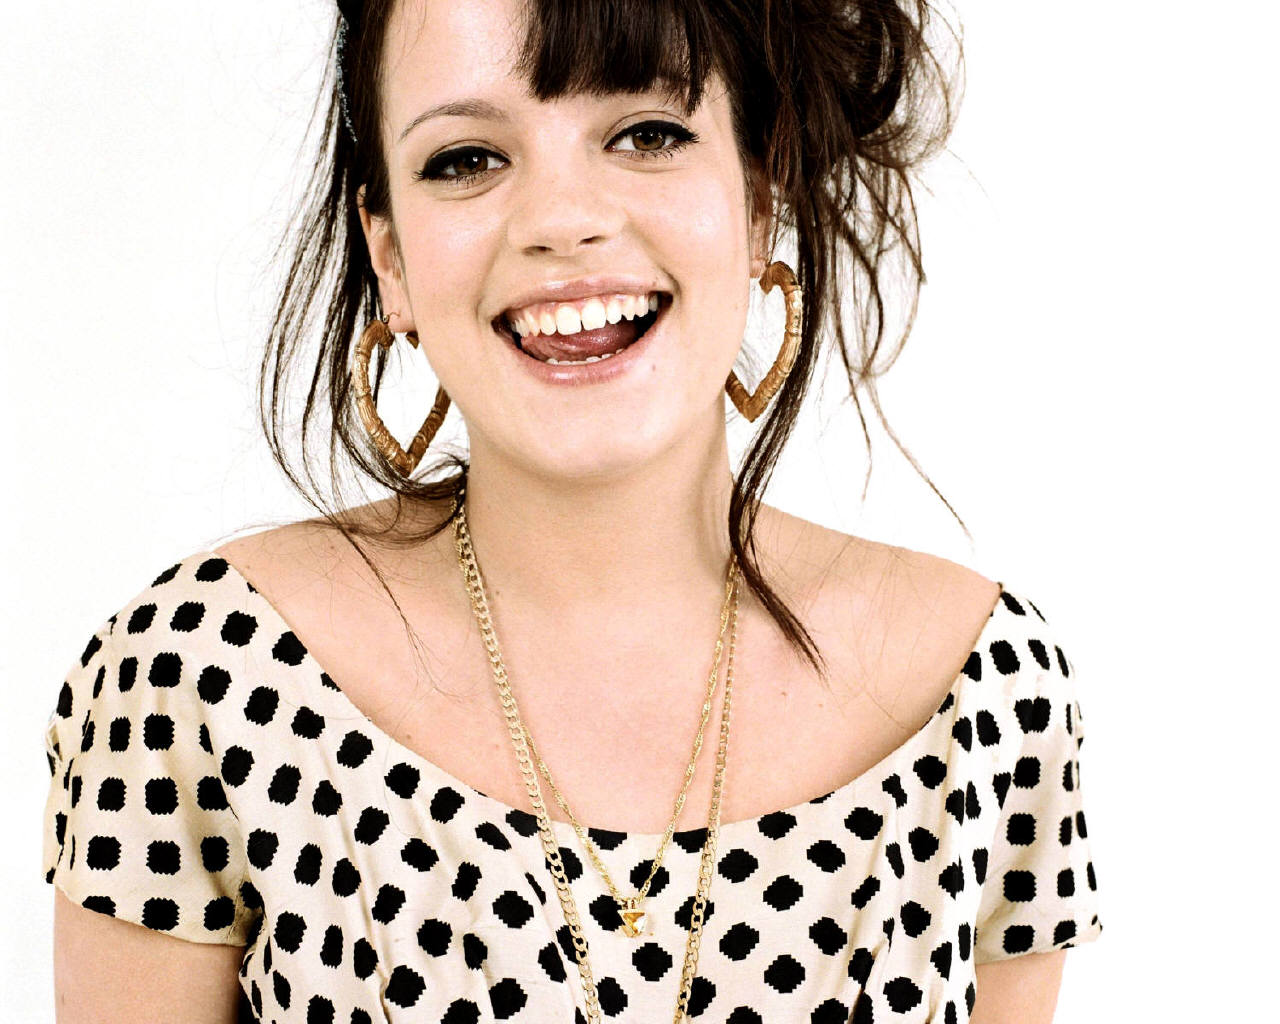 Lily Allen Wallpapers